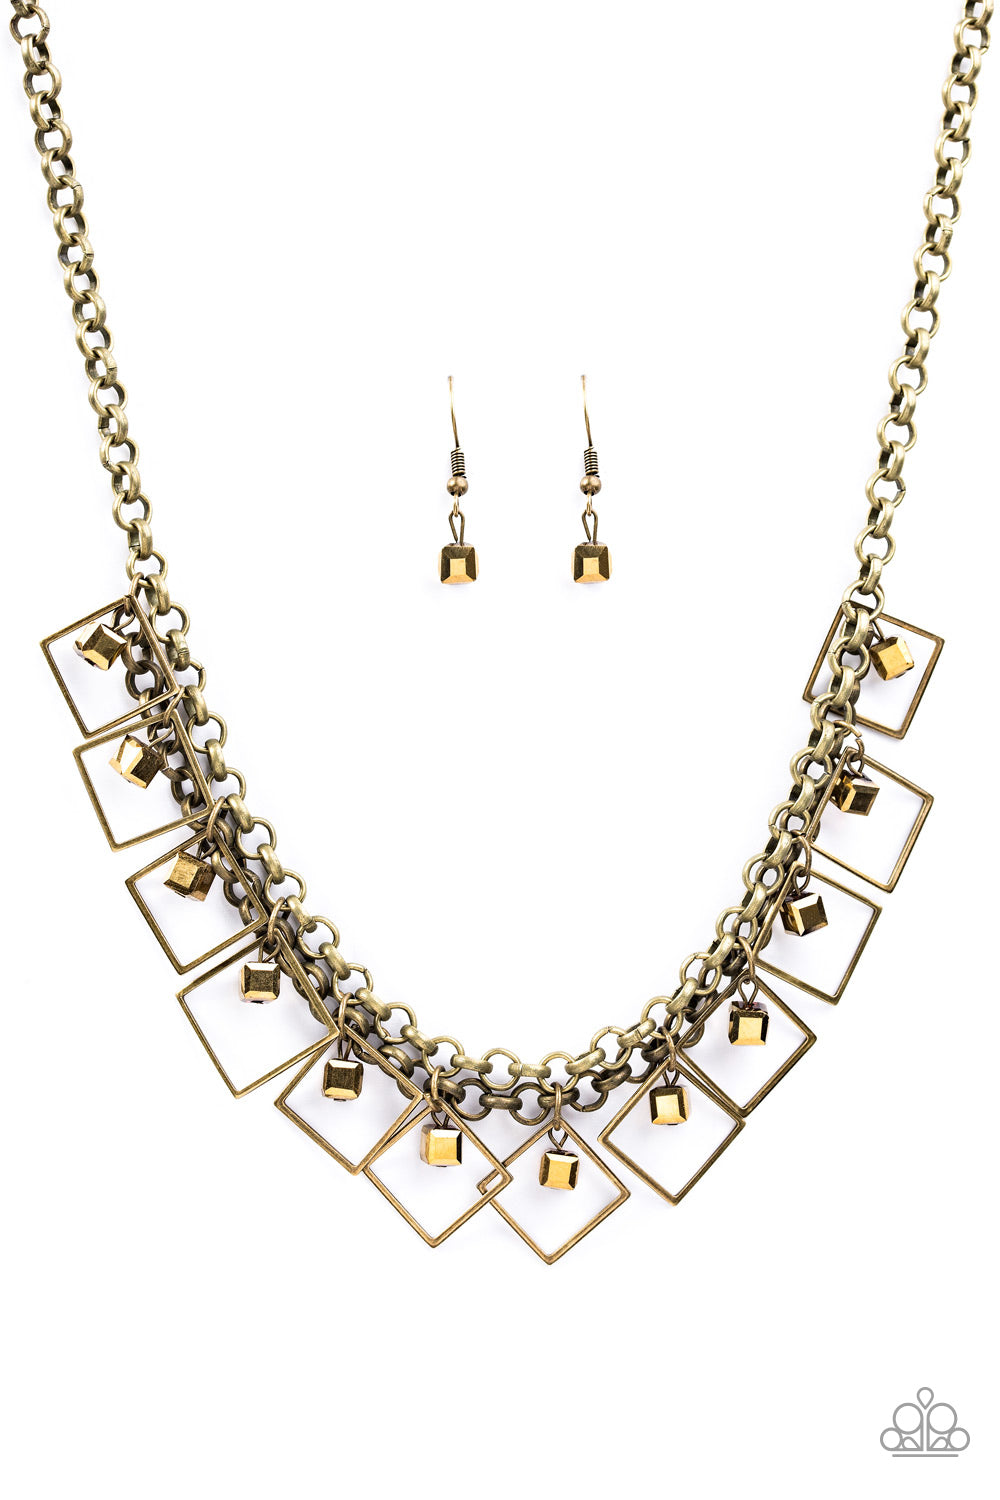 GEO Down In History - Brass Necklace Set - Princess Glam Shop